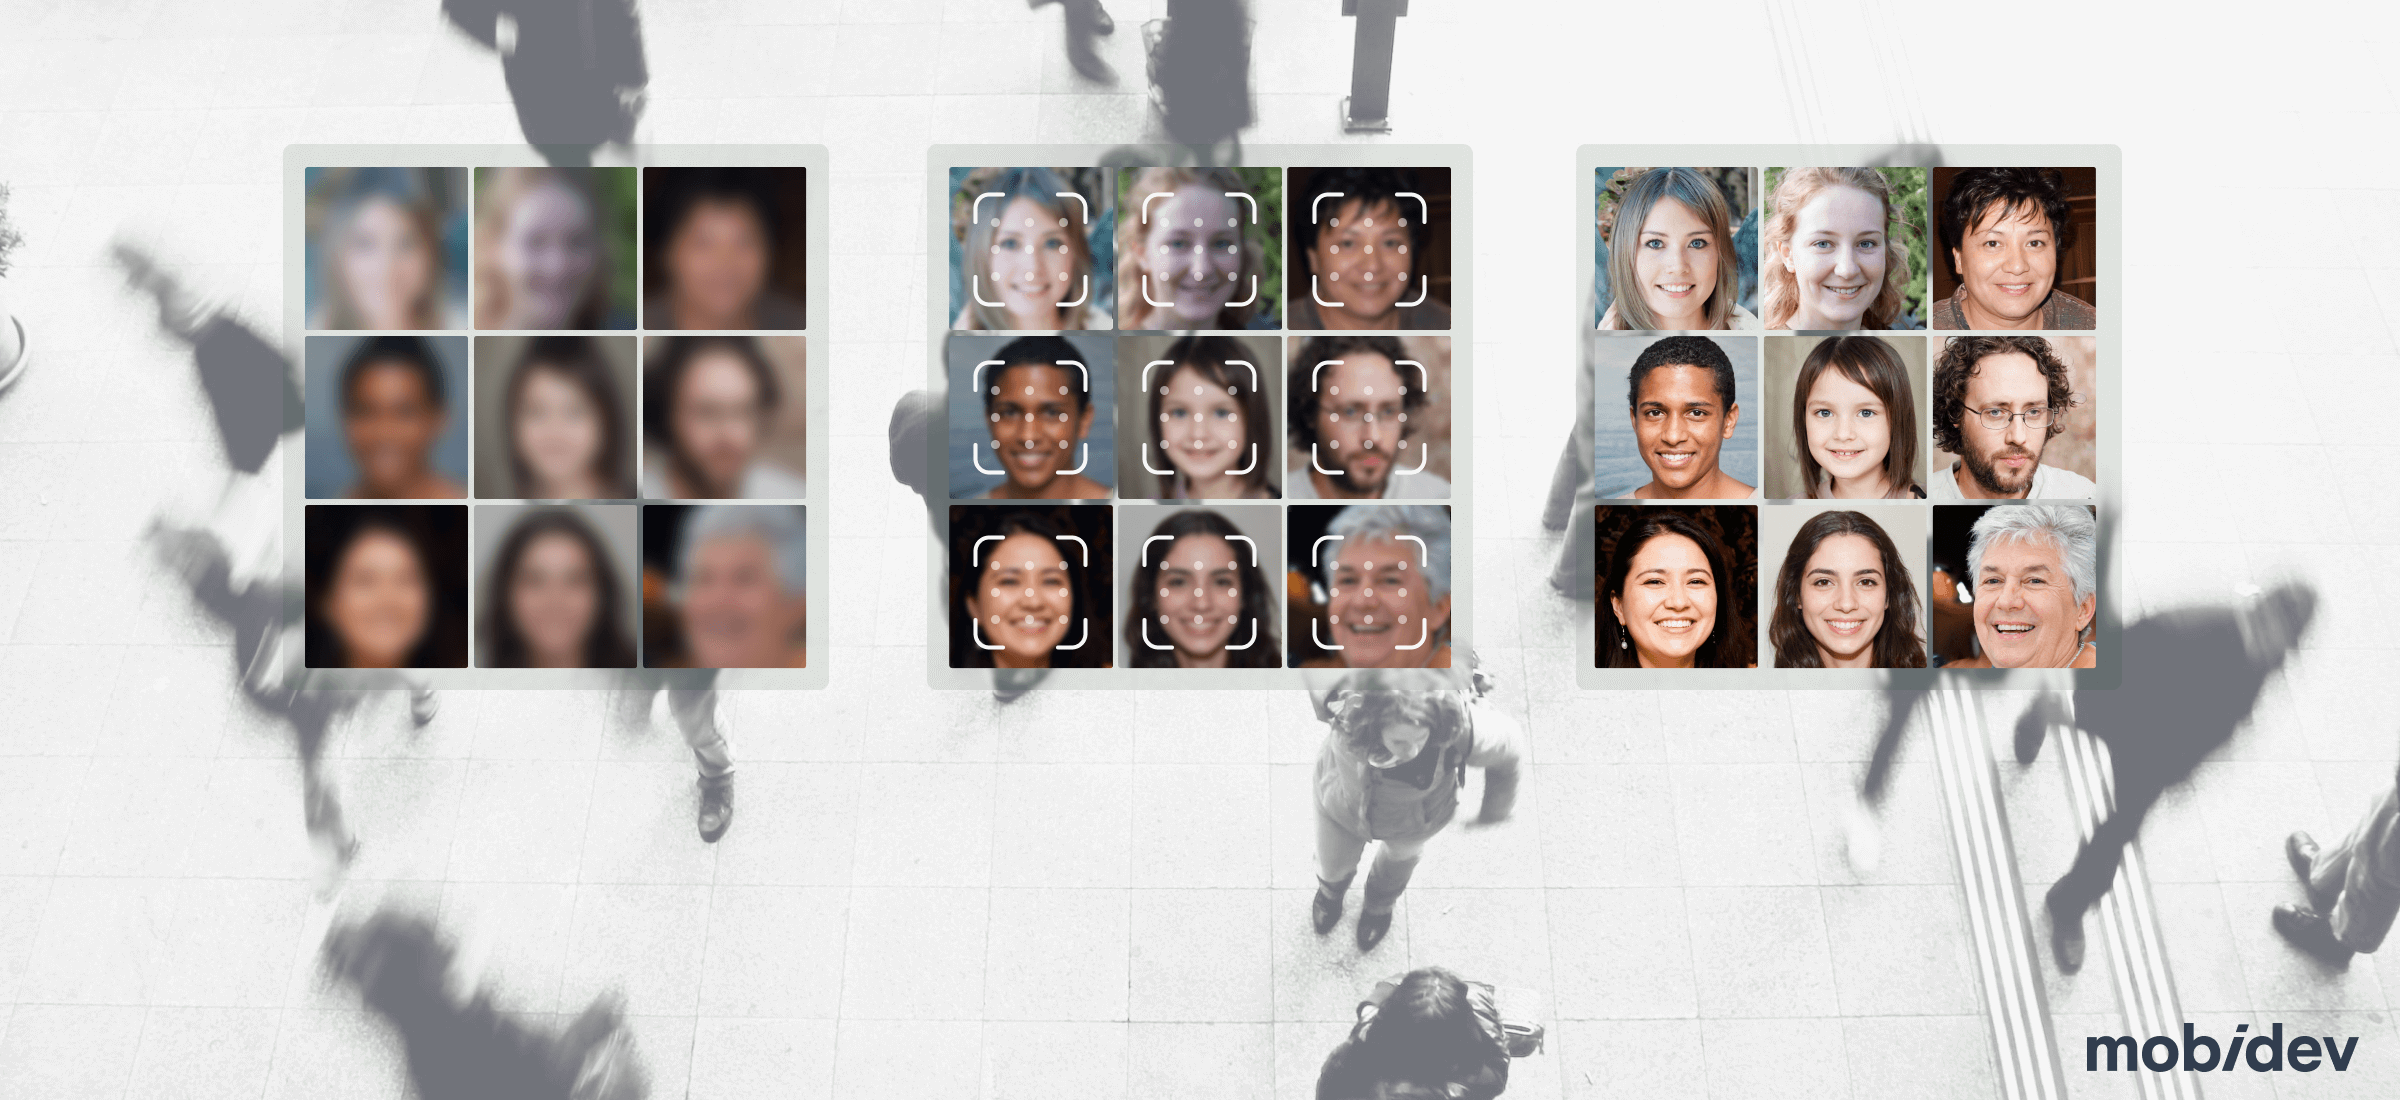 How to Build a Facial Recognition System for Your App